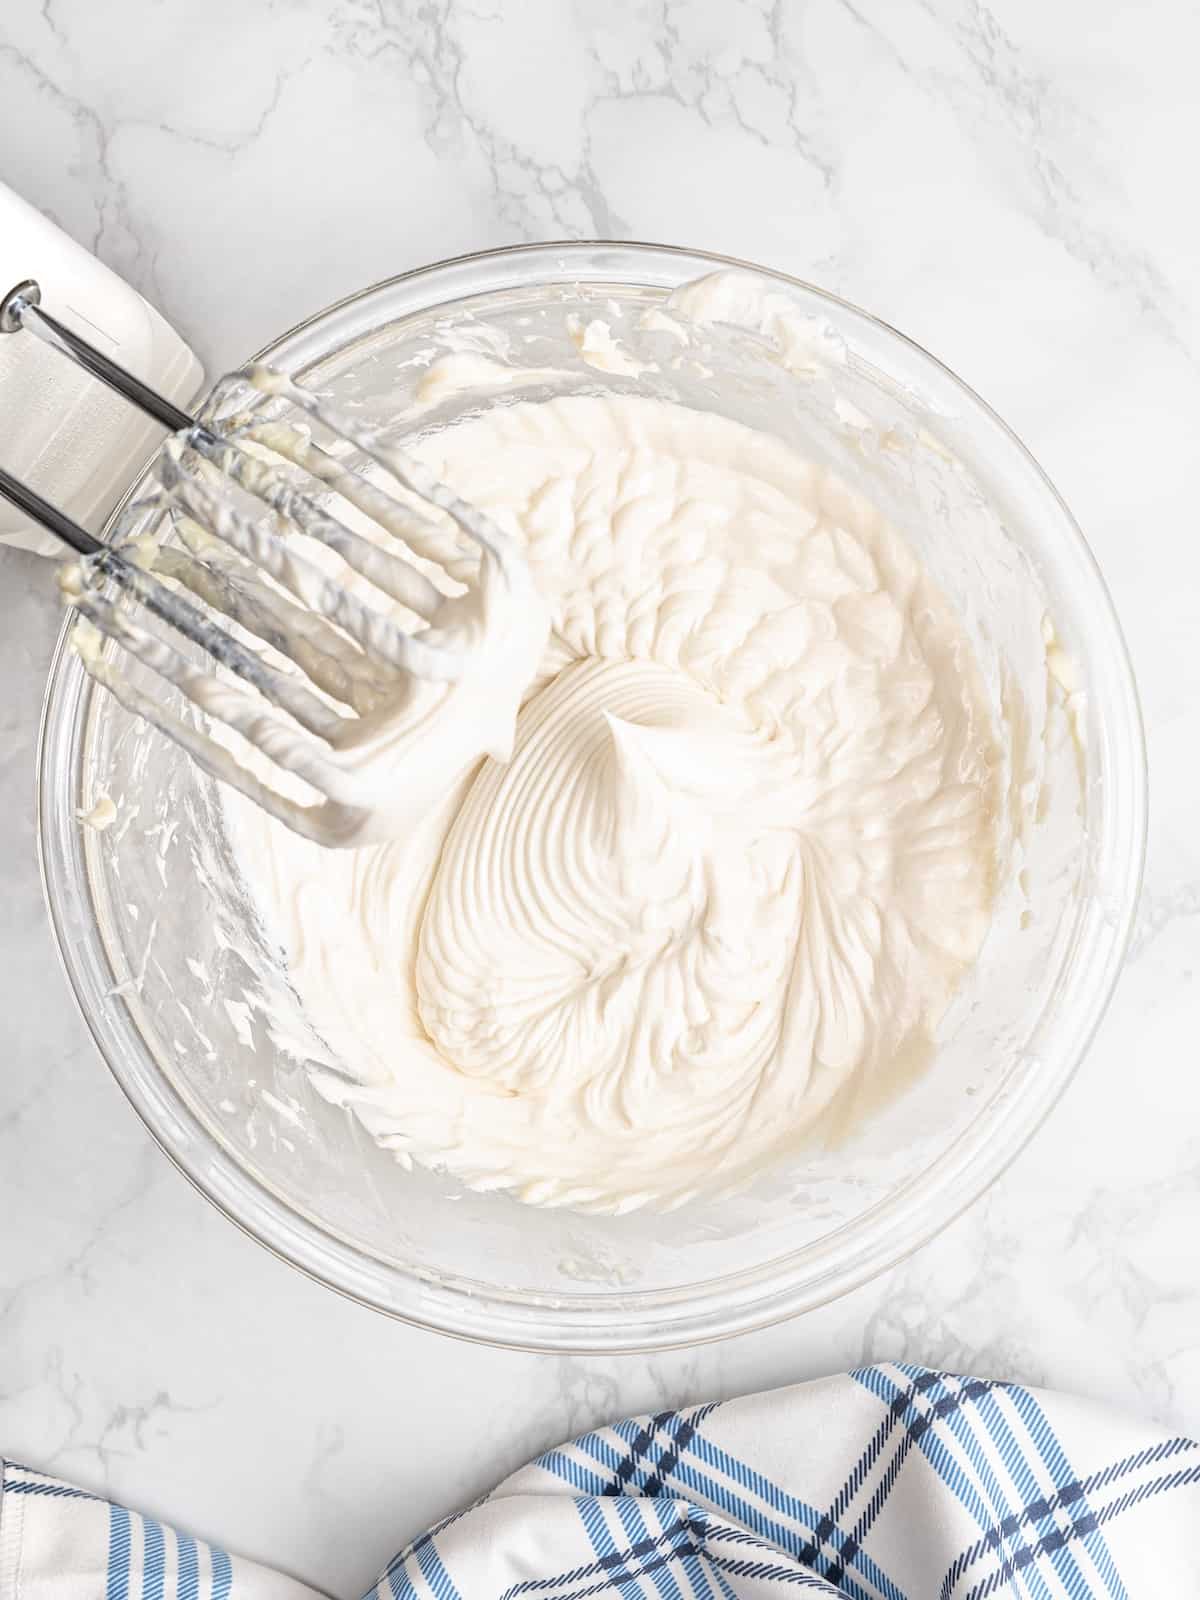 A hand mixer propped over a bowl with freshly beaten vanilla cream filling.